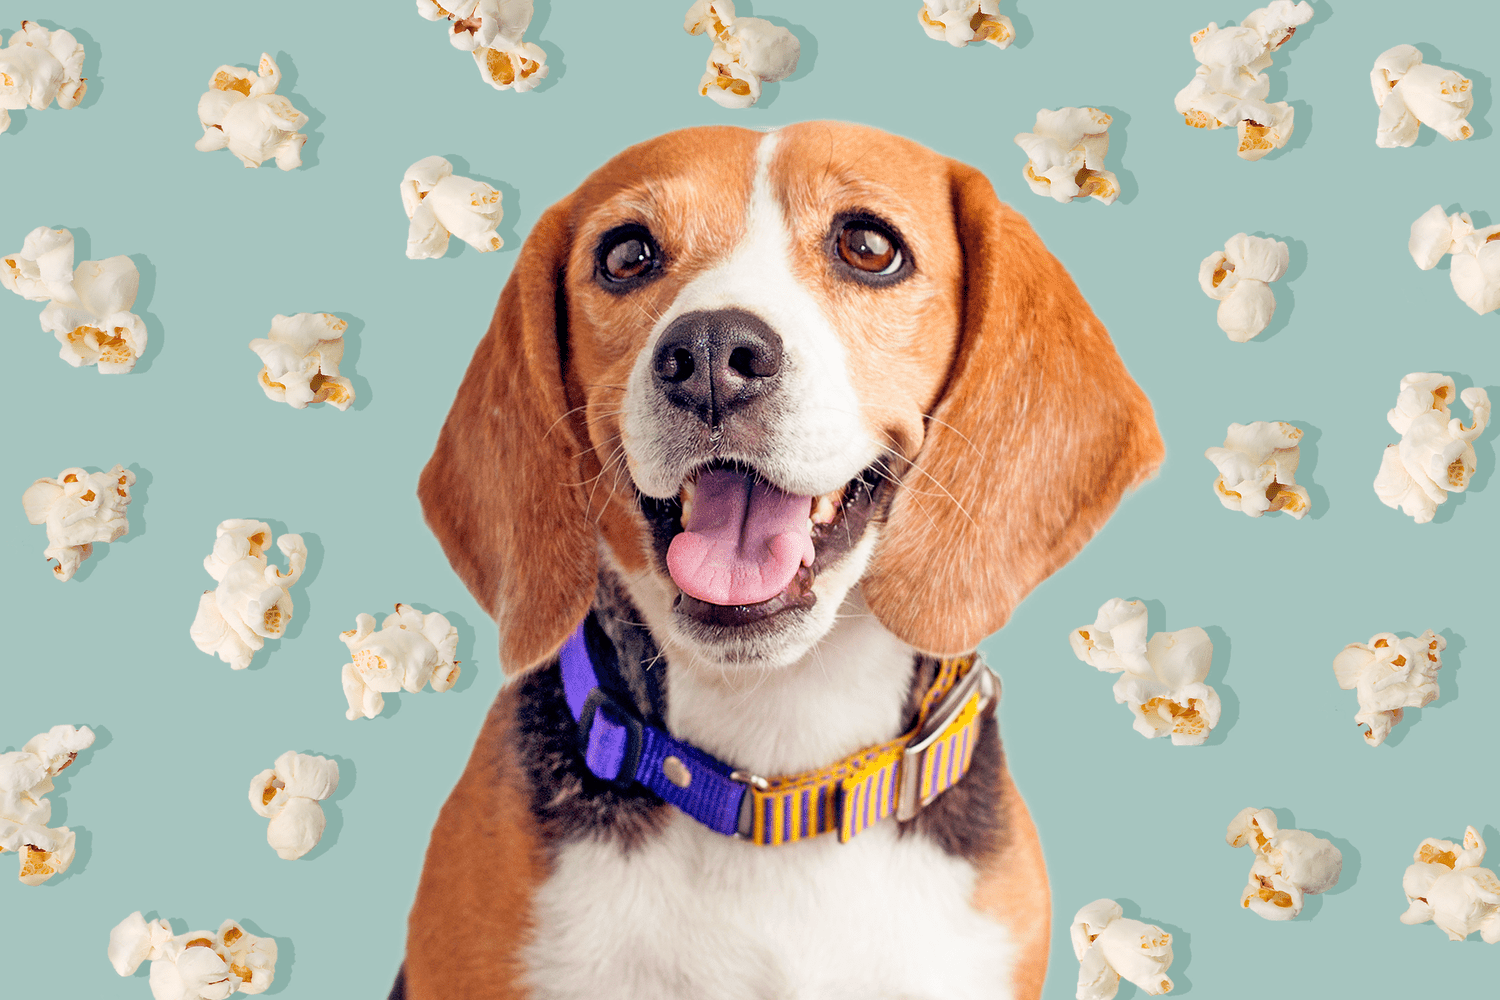 beagle with background of popcorn; can dogs eat popcorn?